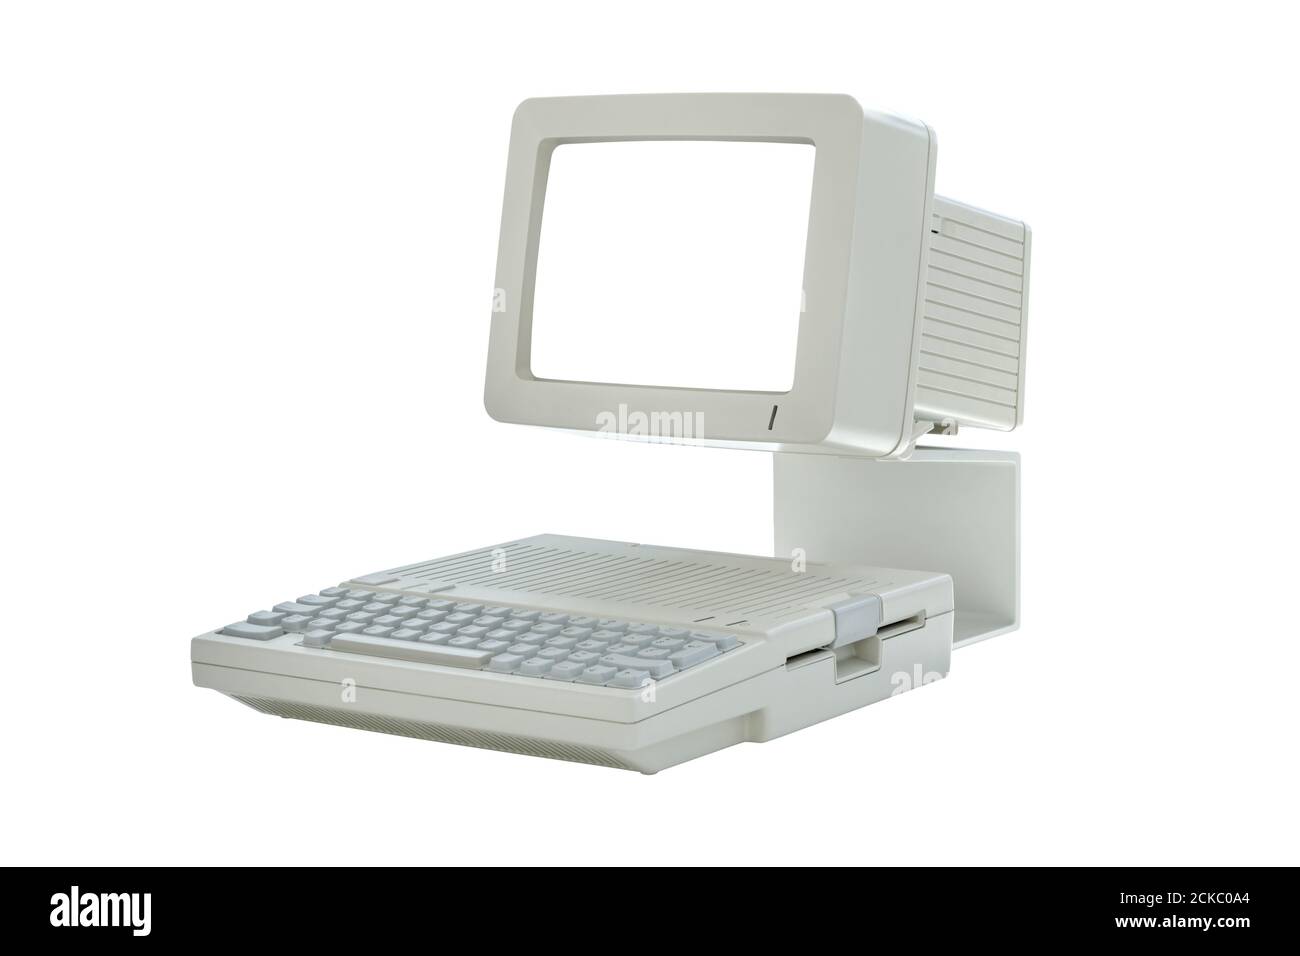 Old vintage desktop computer from the eighties with blank screen isolated on white background. Side view of retro classic PC Stock Photo